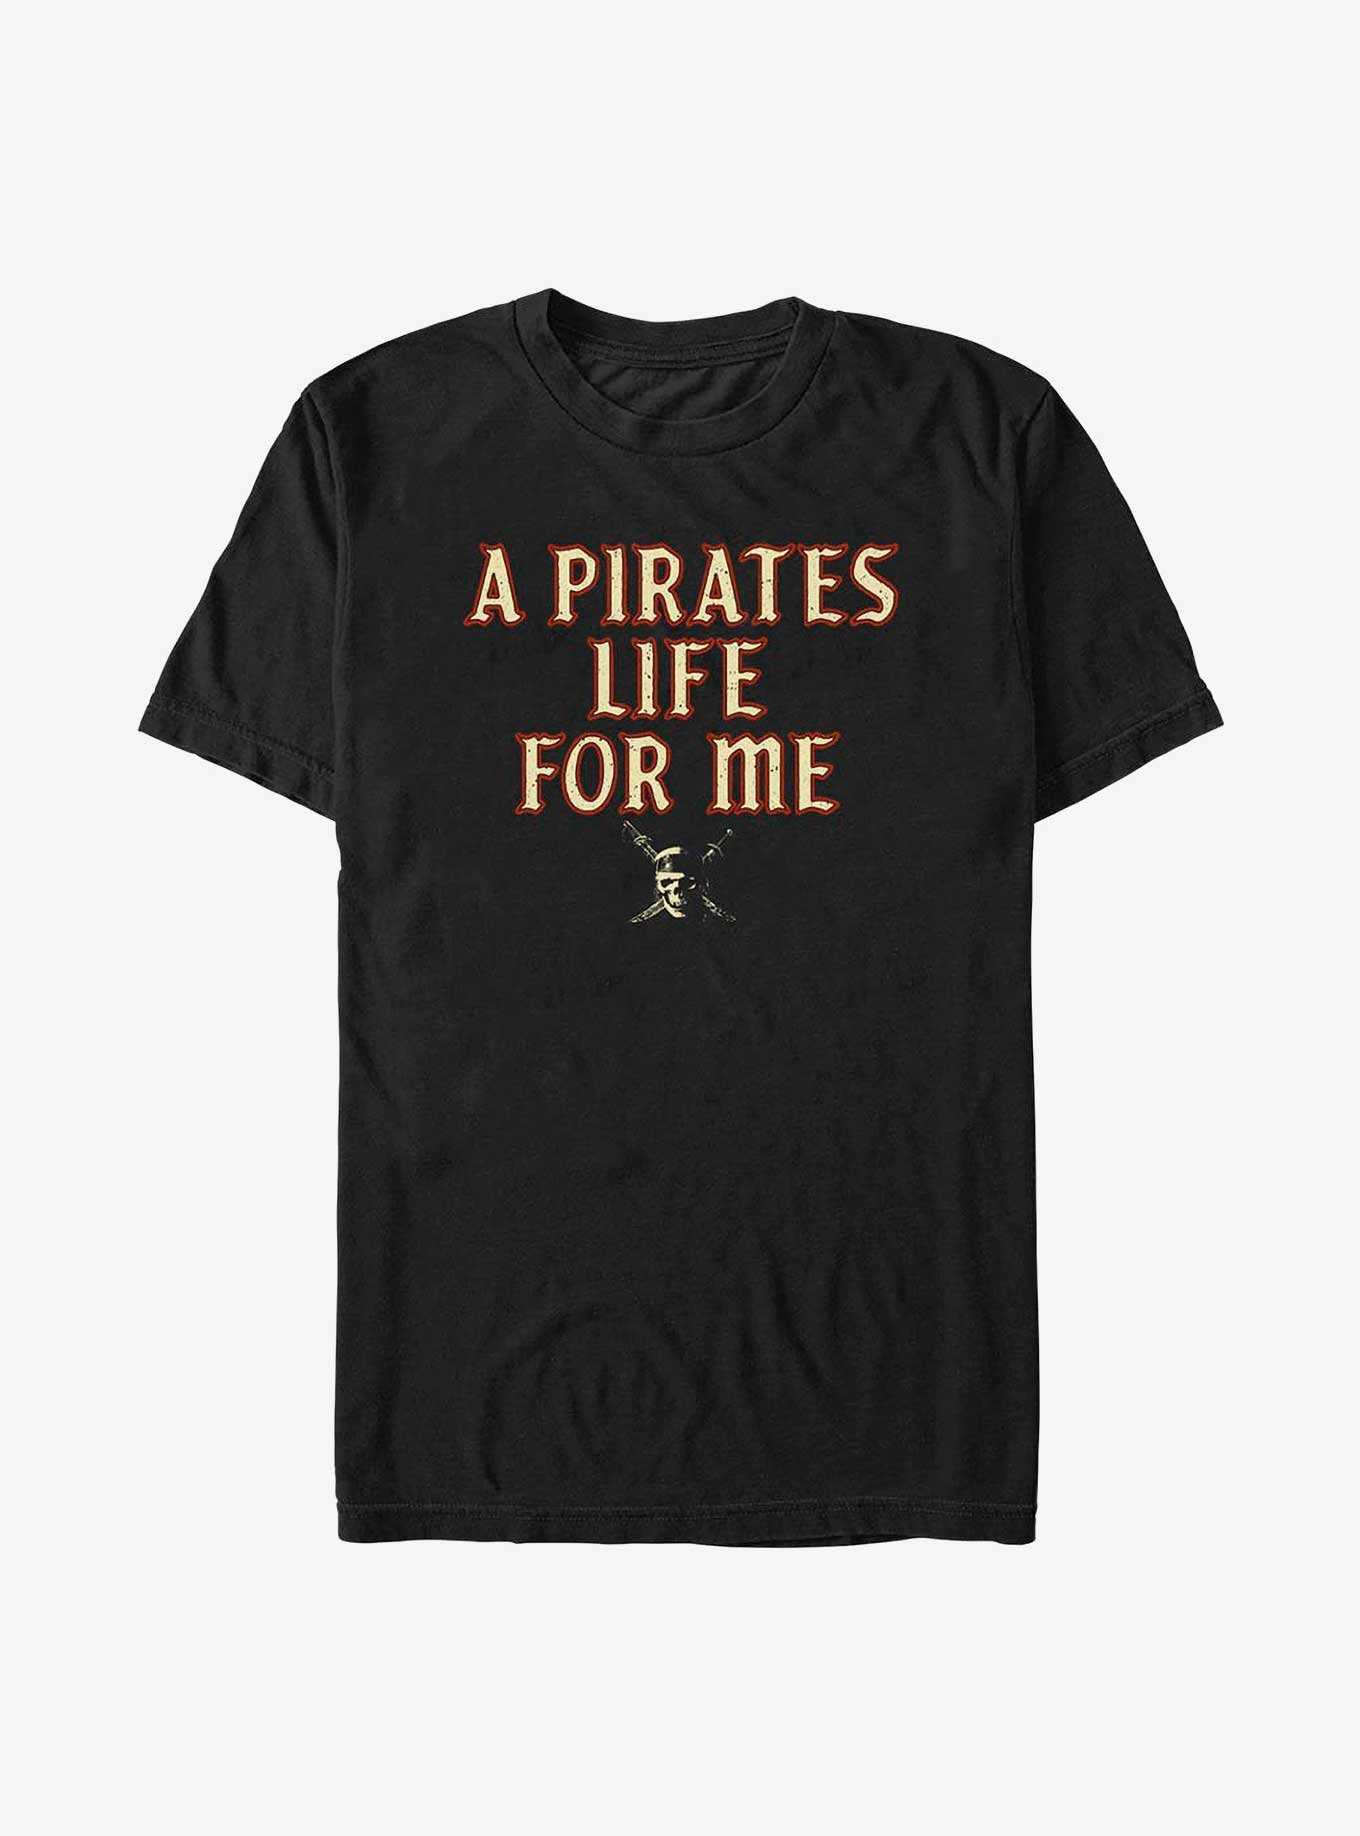 Disney Pirates of the Caribbean A Pirate's Life For Me T-Shirt, , hi-res